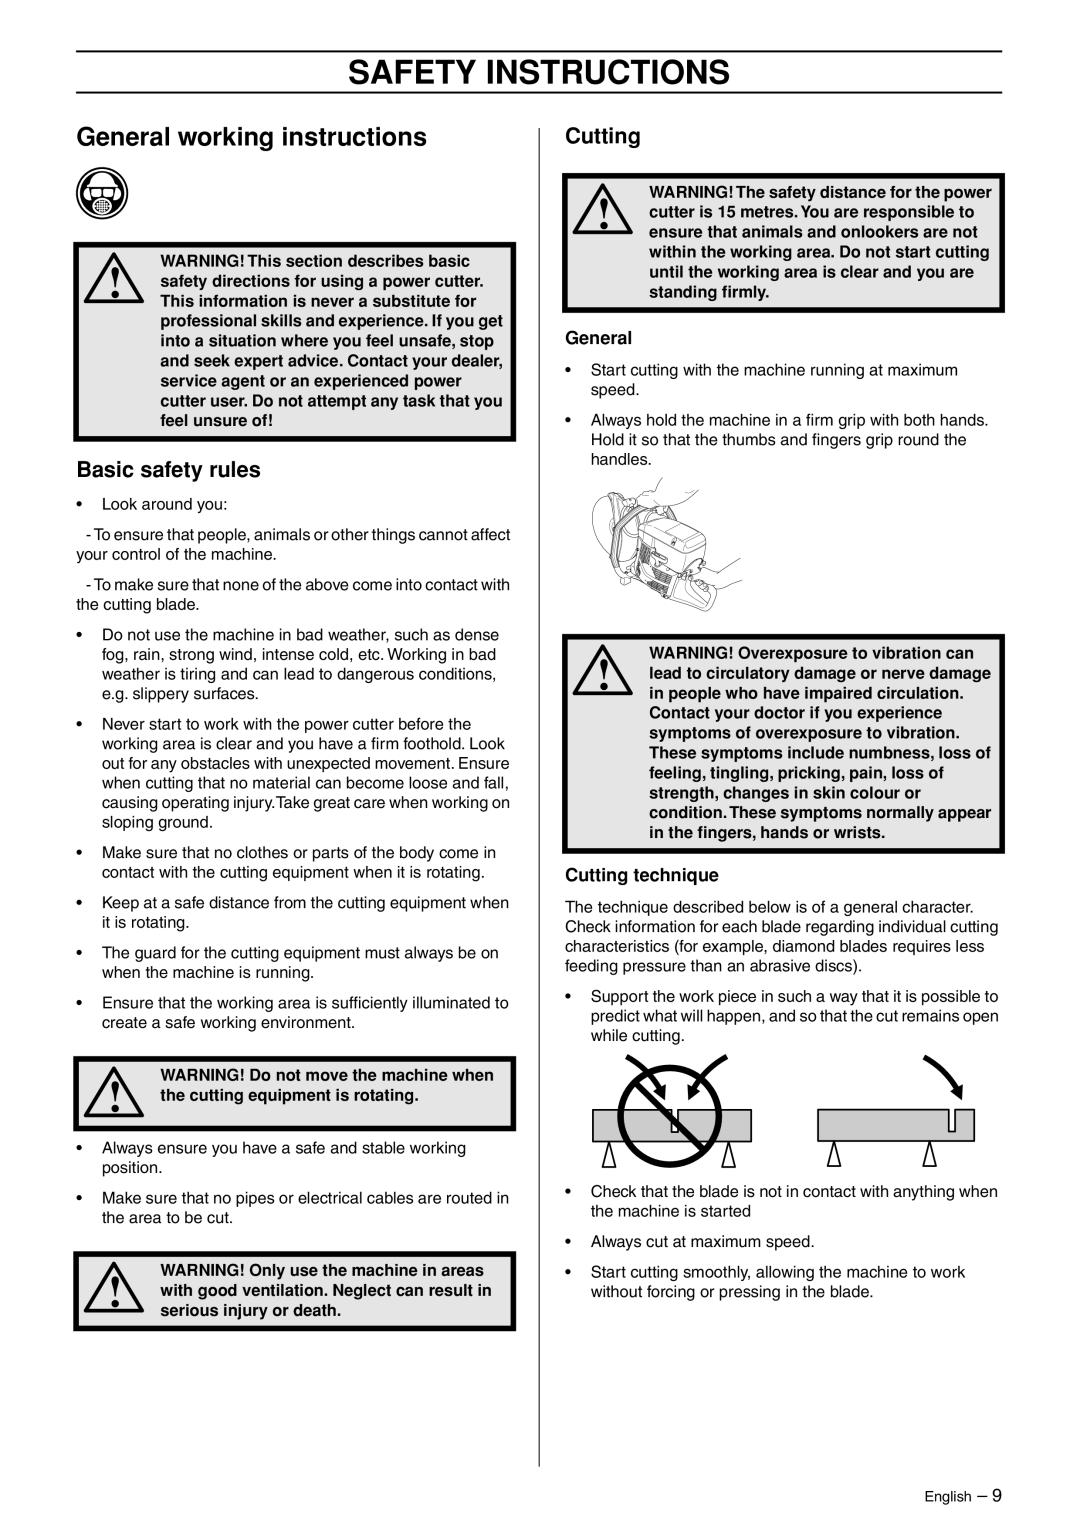 Husqvarna K750 manual General working instructions, Basic safety rules, Cutting technique, Safety Instructions 